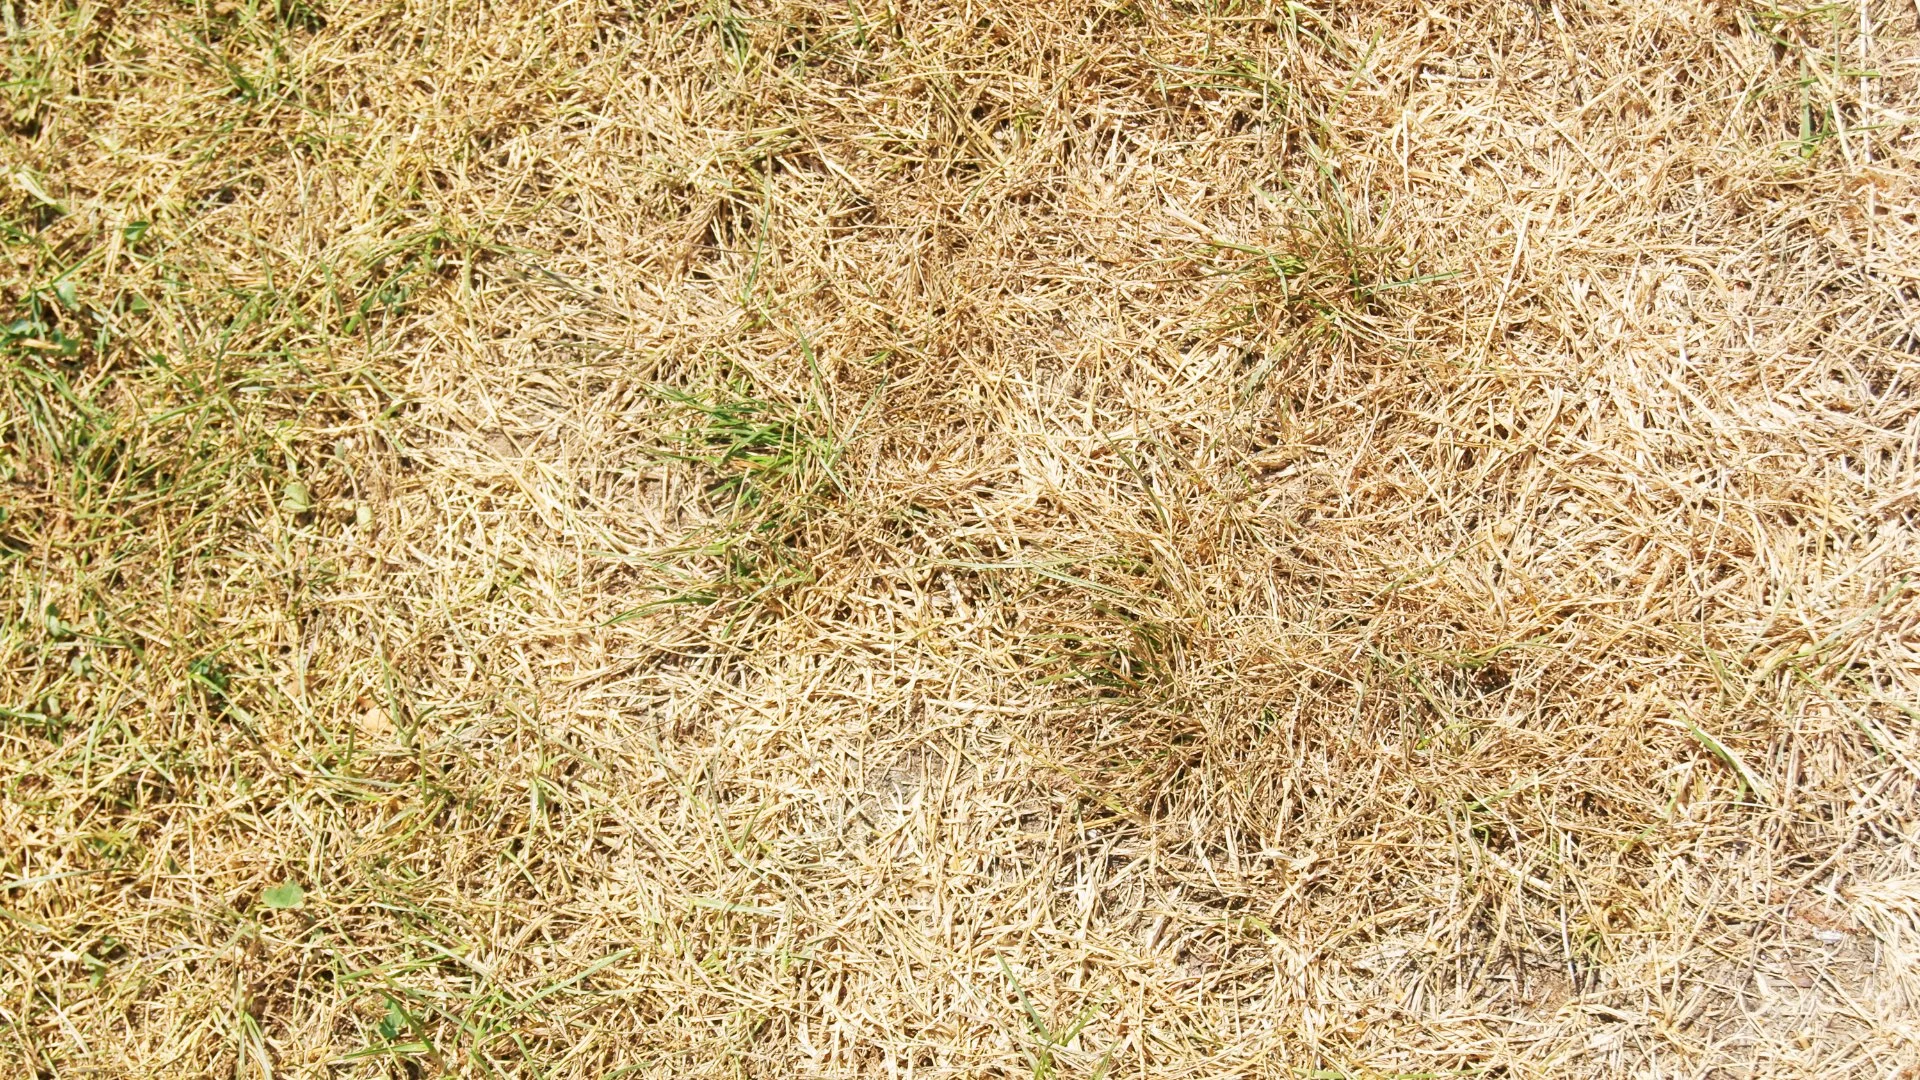 Is My Lawn Brown From Dehydration, Over-Fertilization, or a Turf Disease?